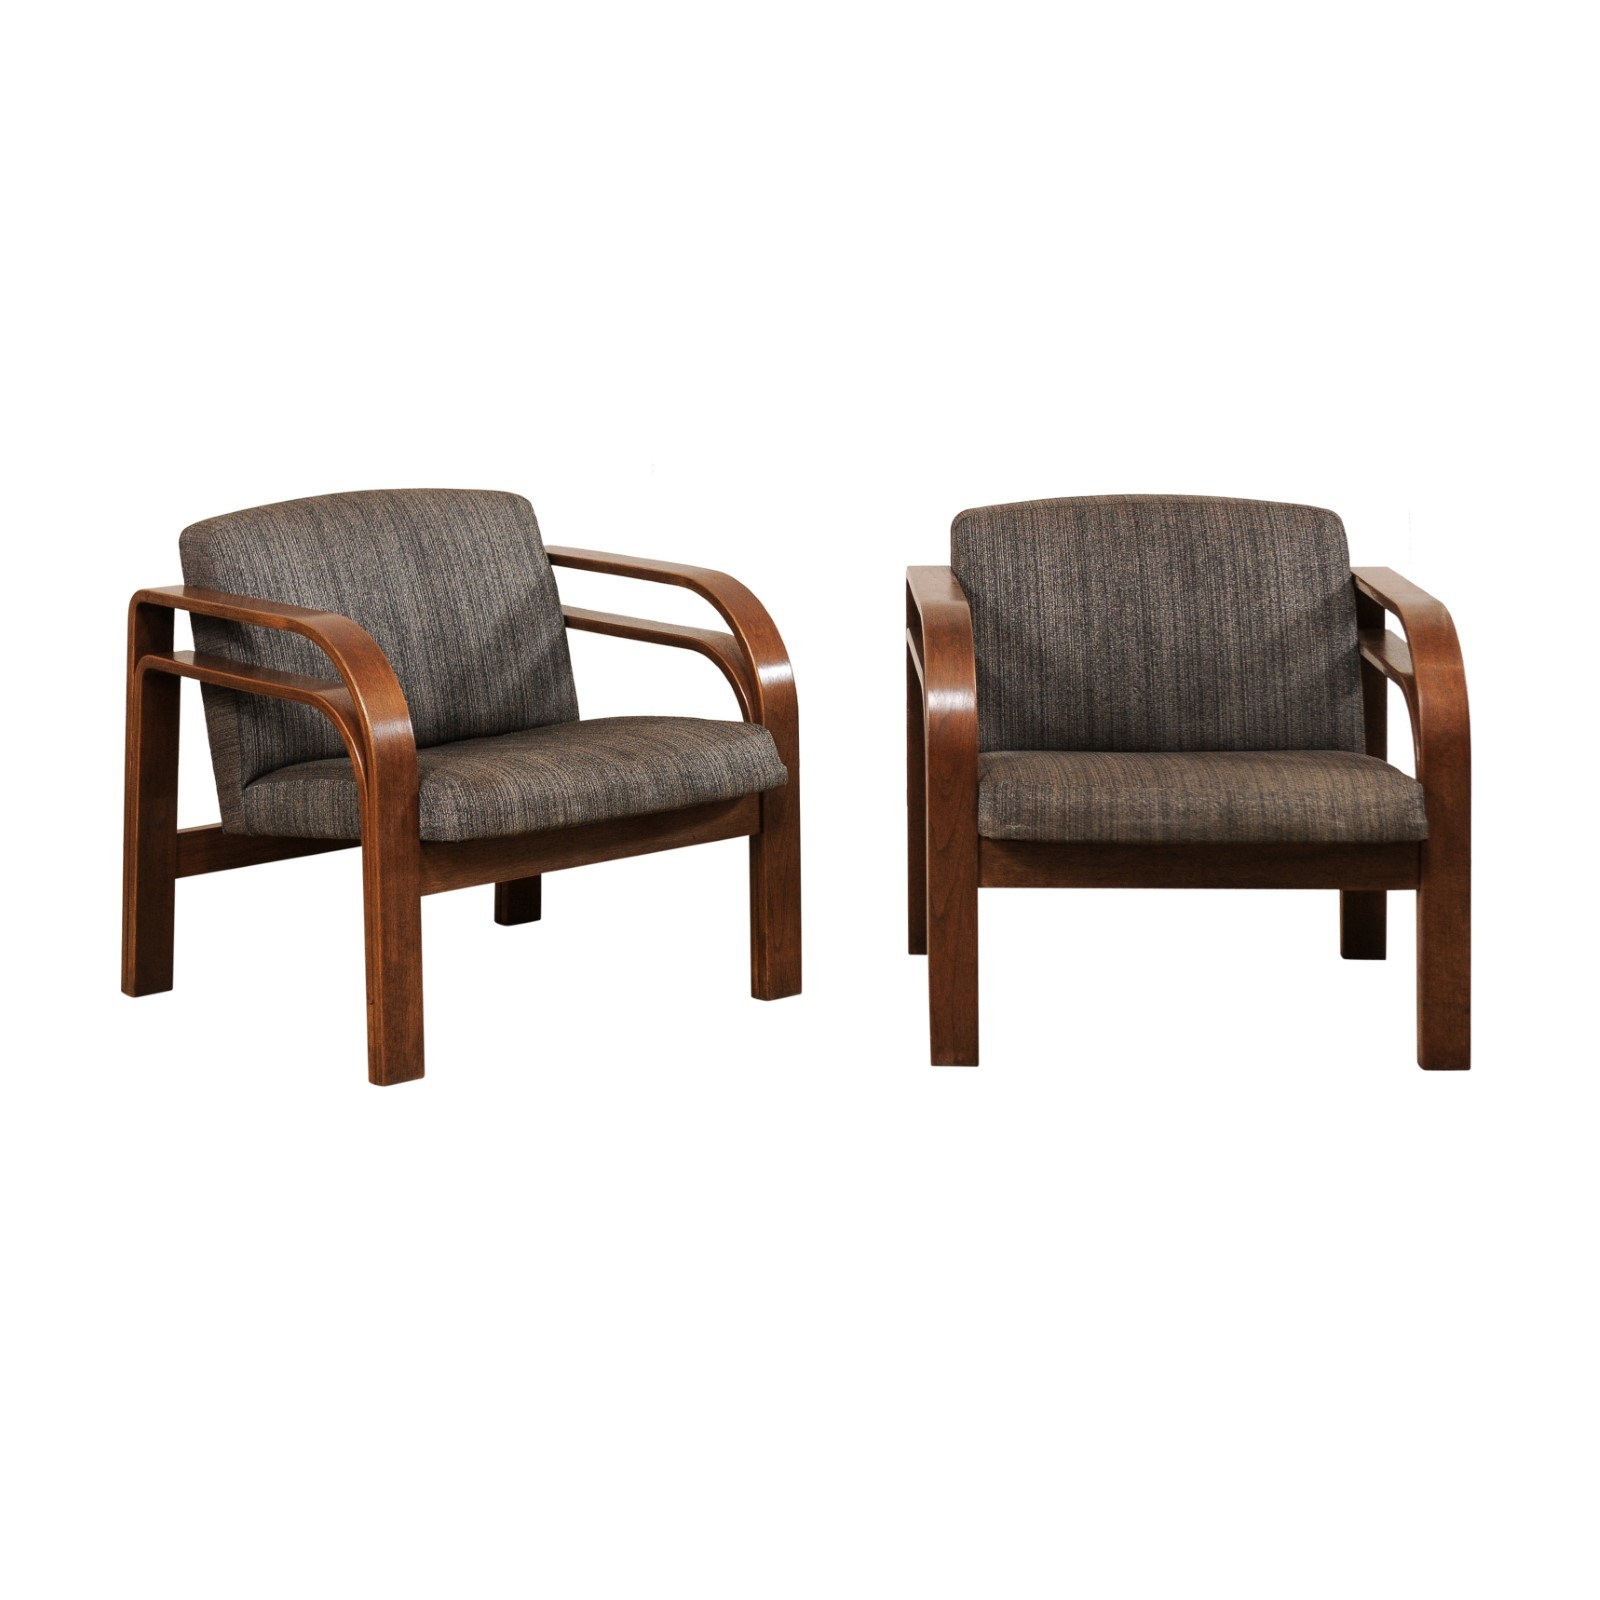 Pair French Double Bent-Wood Arm Chairs